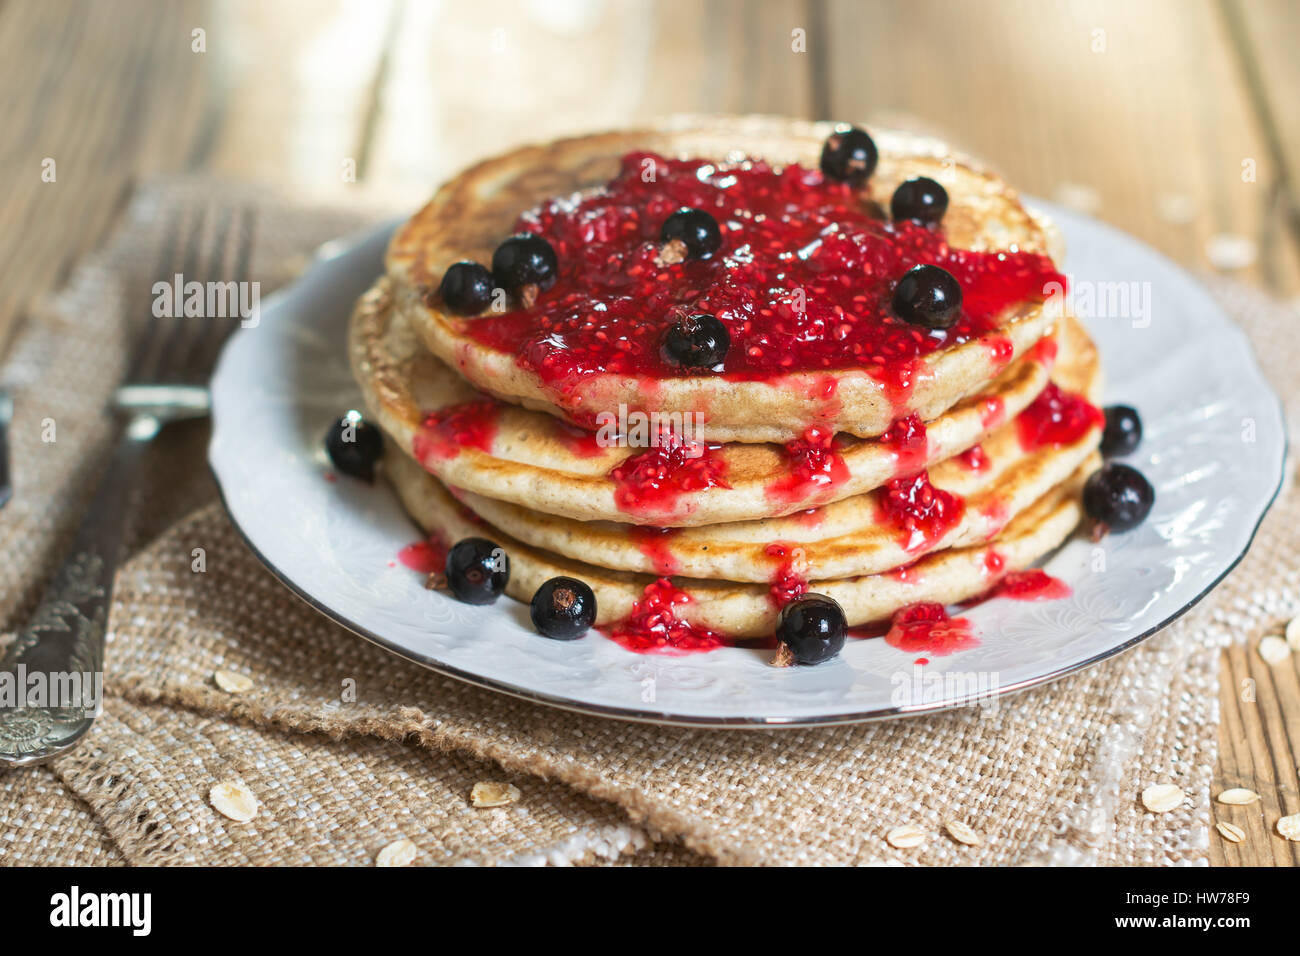 Delicious Oatmeal Pancake with raspberry jam and decorated with black currant. Natural sunlight in the background. Shallow DOF Stock Photo